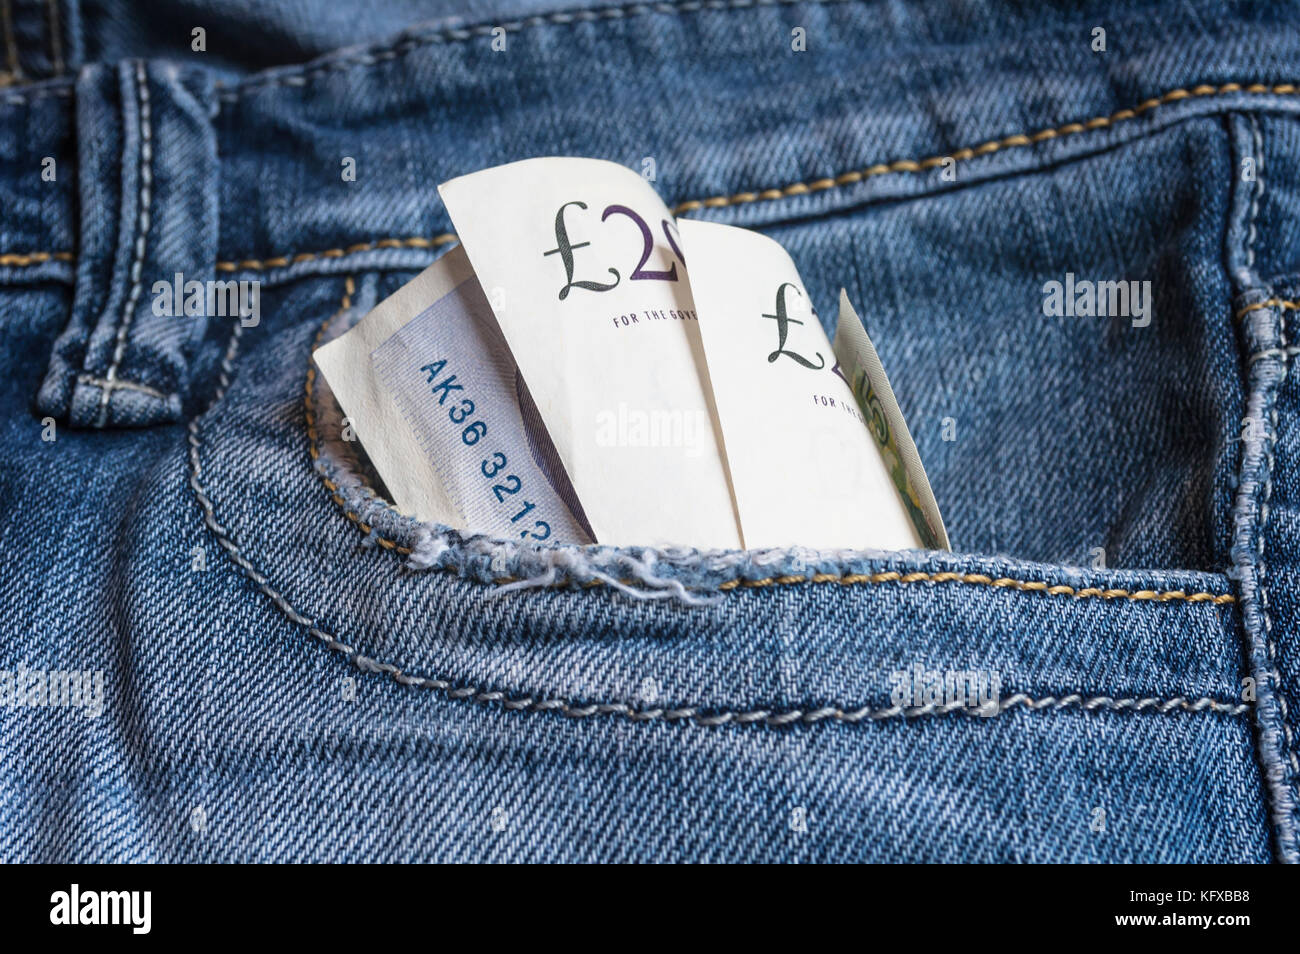 UK Pounds banknotes in blue denim pocket. Concept on earning and saving money. Stock Photo